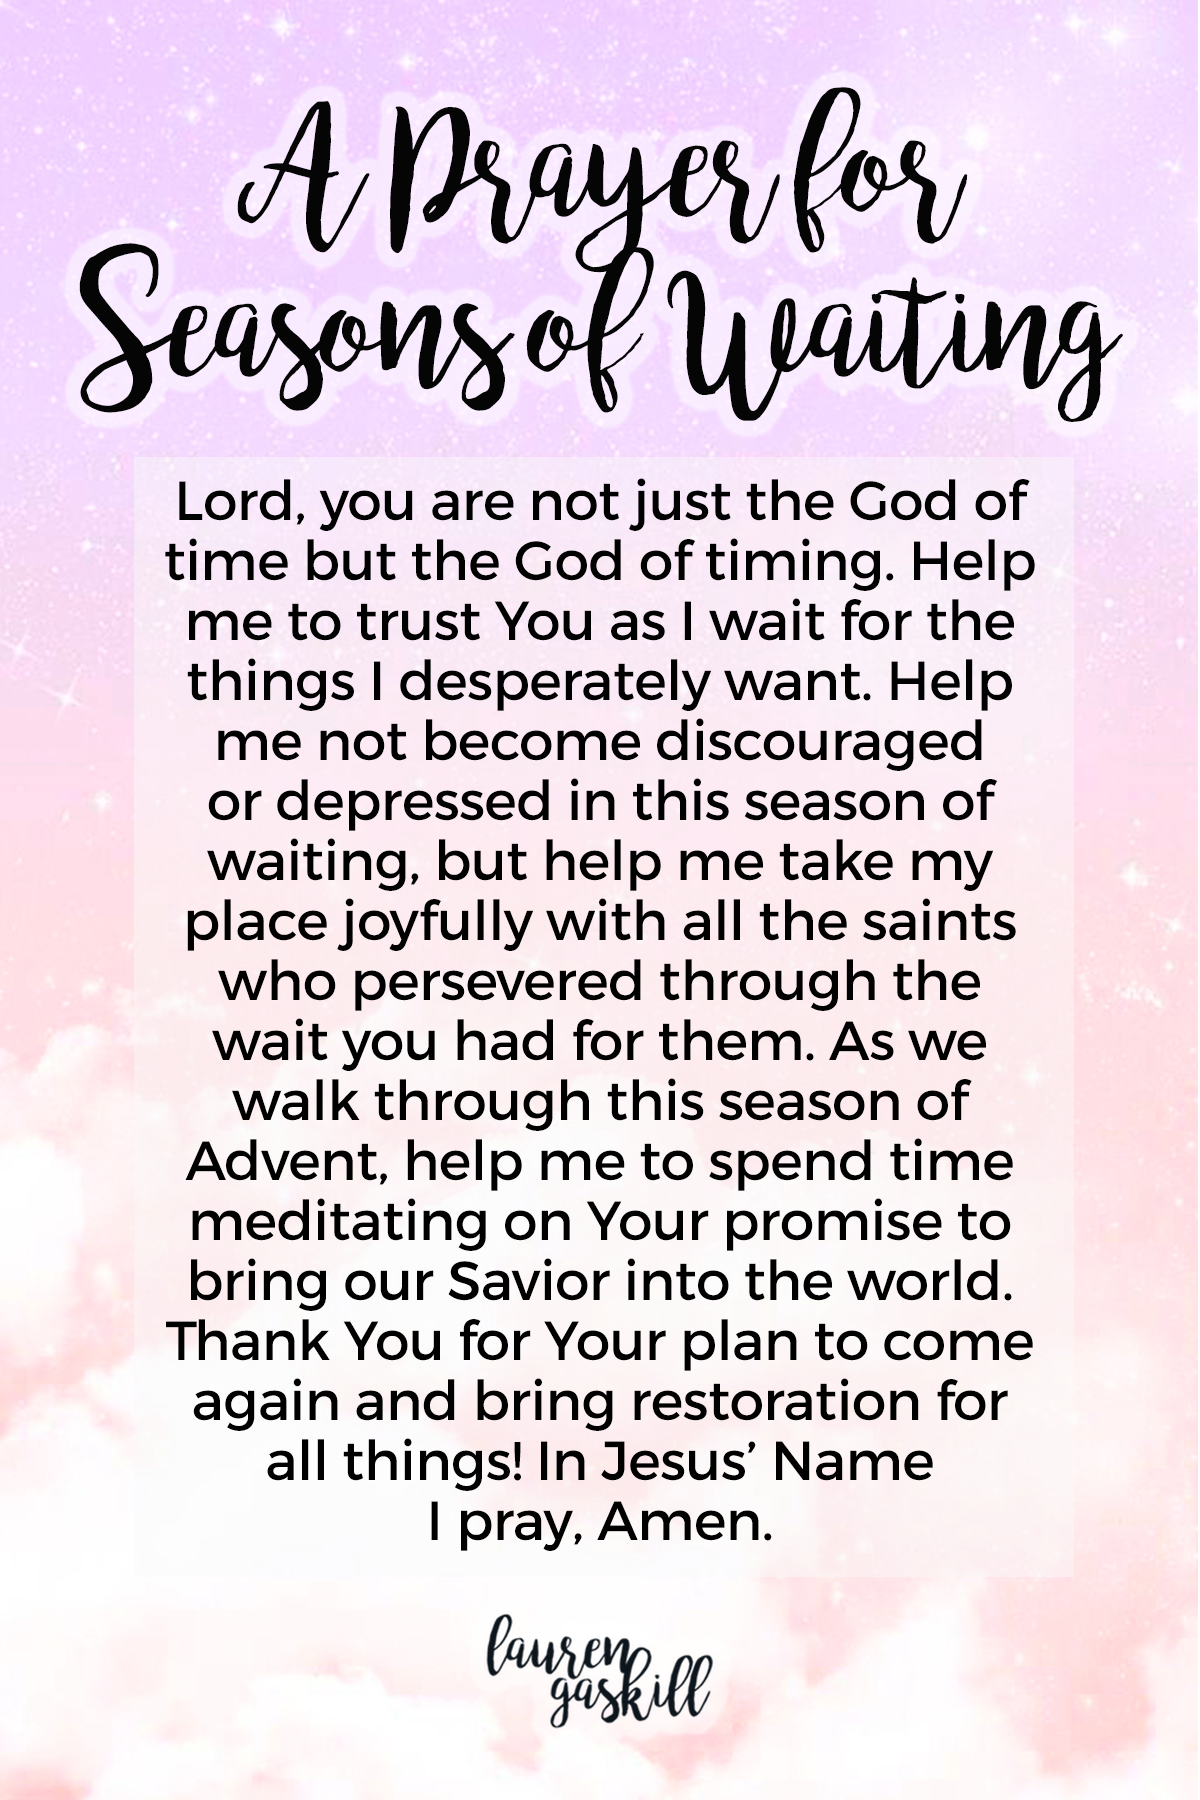 A Prayer for Seasons of Waiting